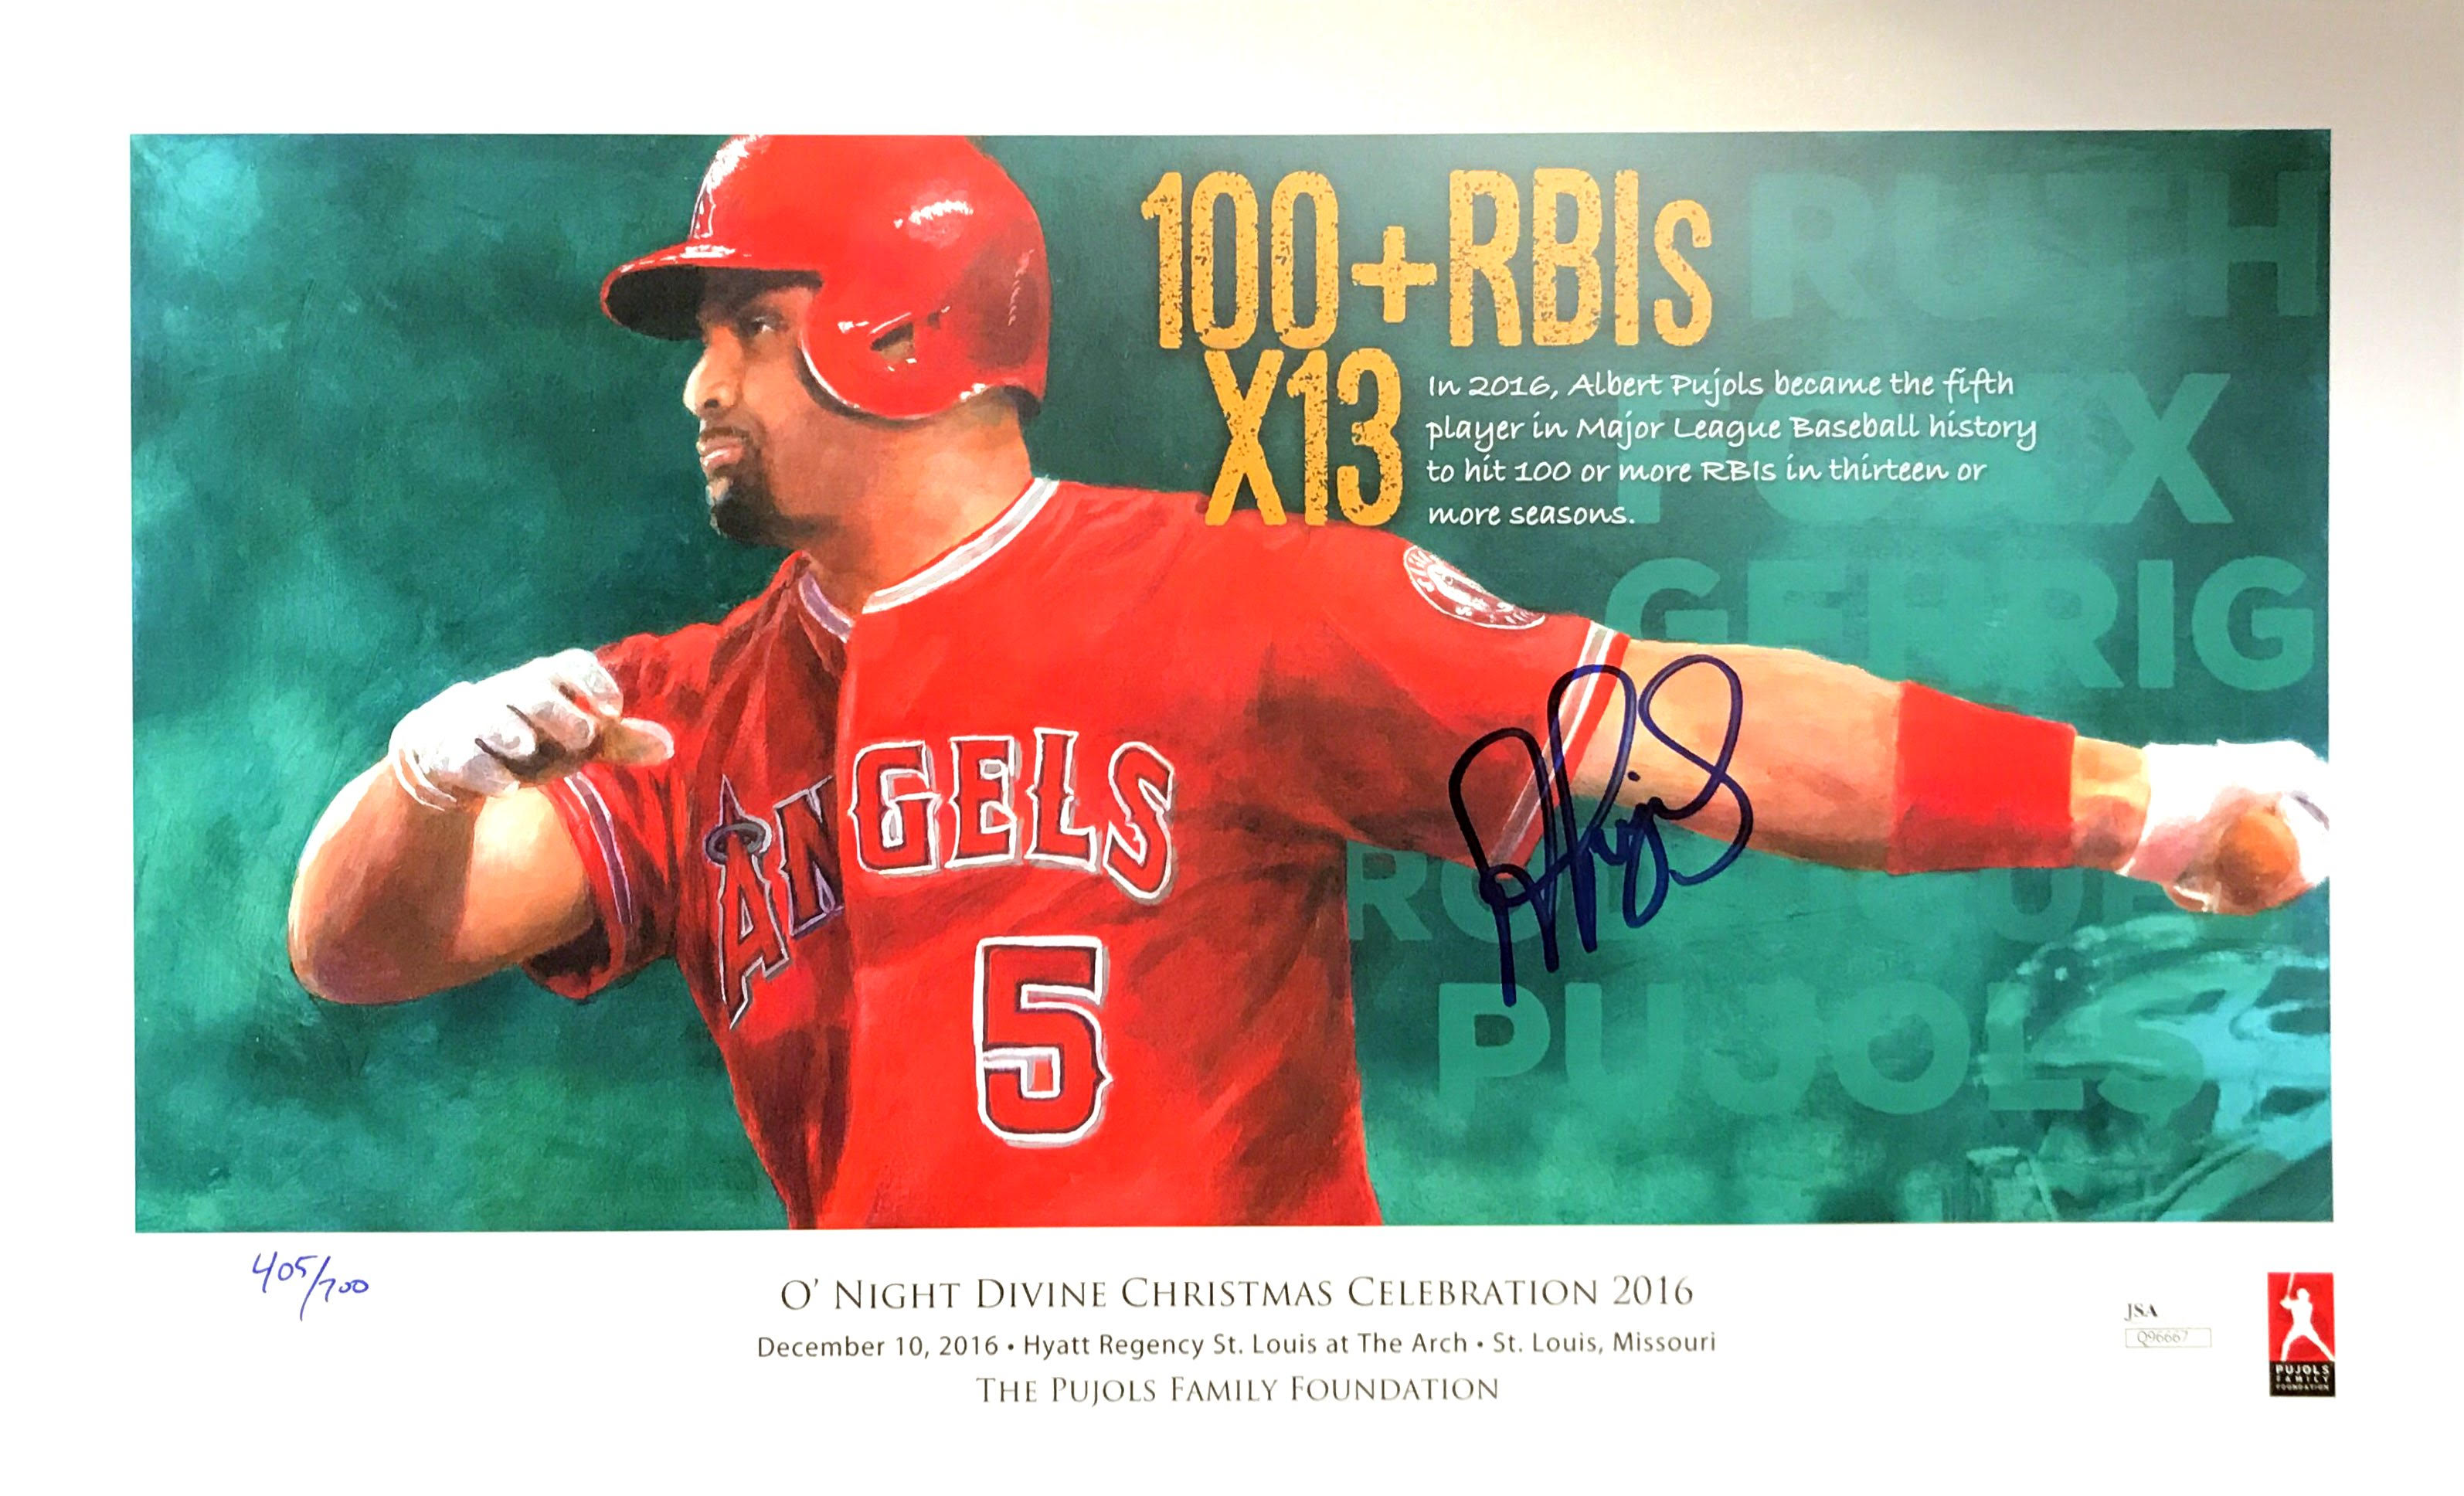 2014 – O' Night Divine, Limited Edition Print. Signed by Albert Pujols